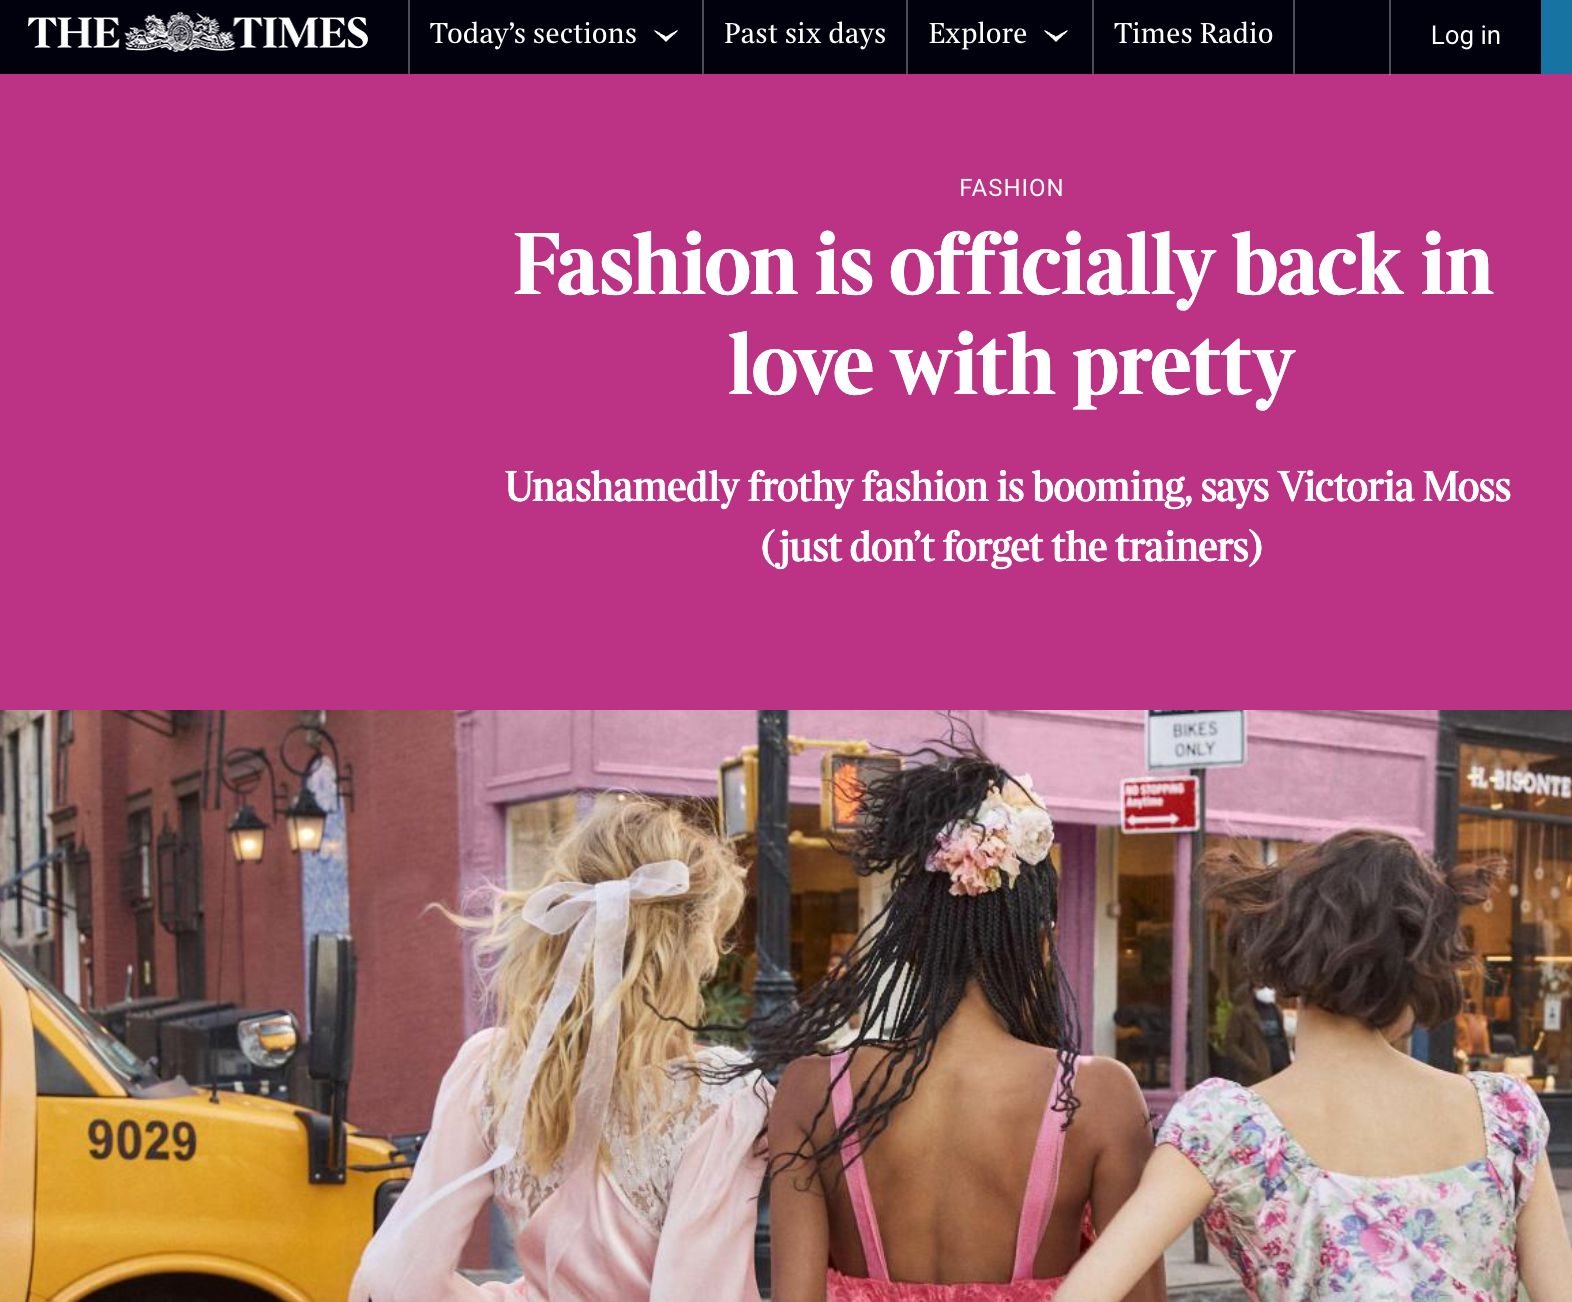 The Times - Fashion is officially back in love with pretty